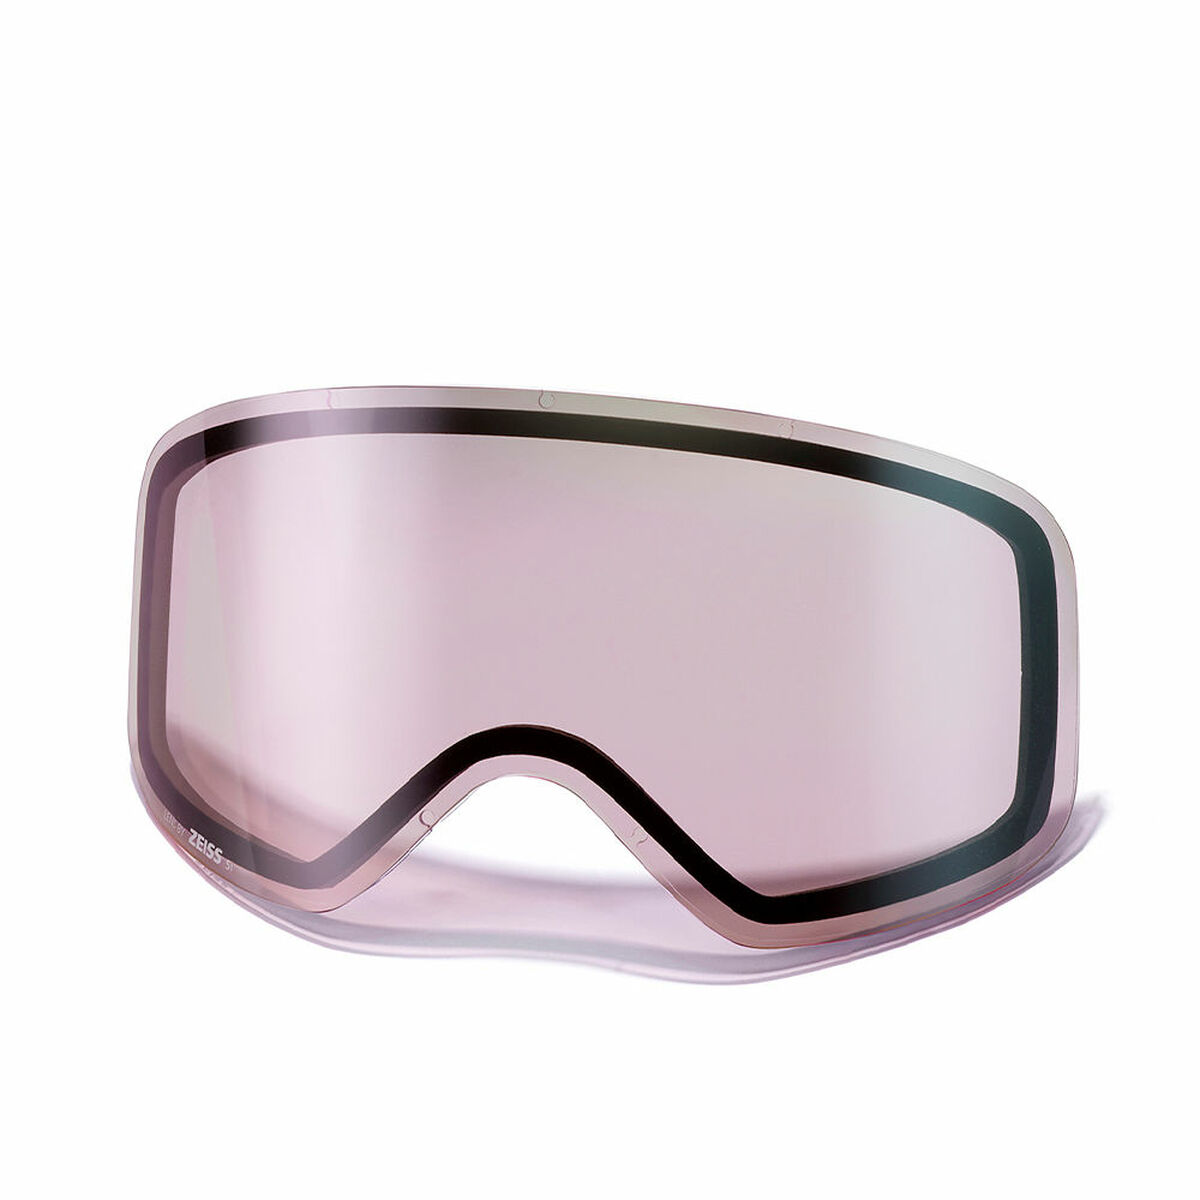 Skibrille Hawkers Small Lens Silberfarben Rosa